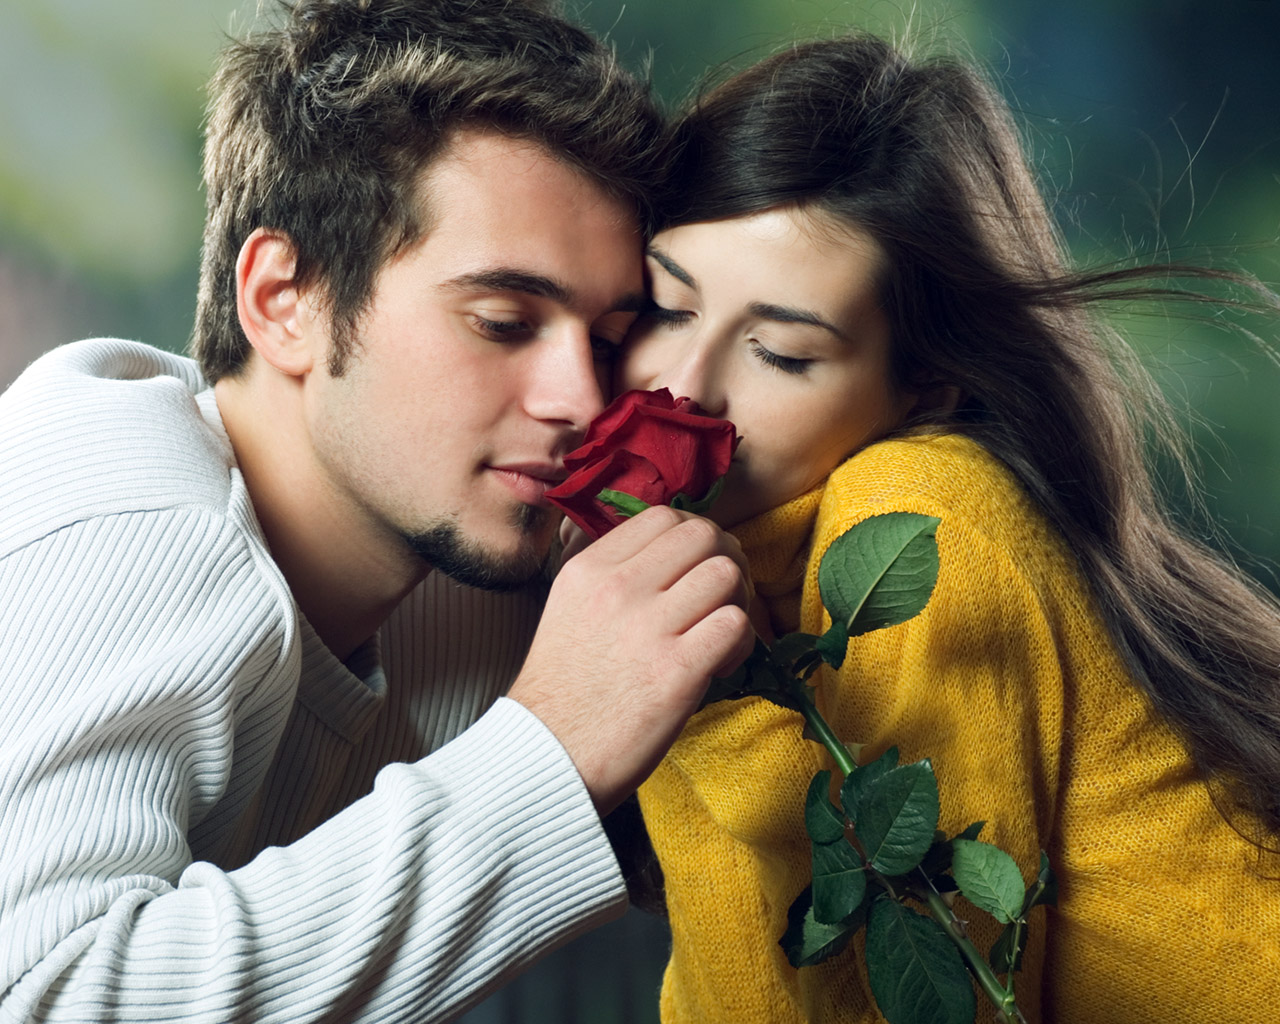 Loving Couple Wallpapers Romantic Backgrounds